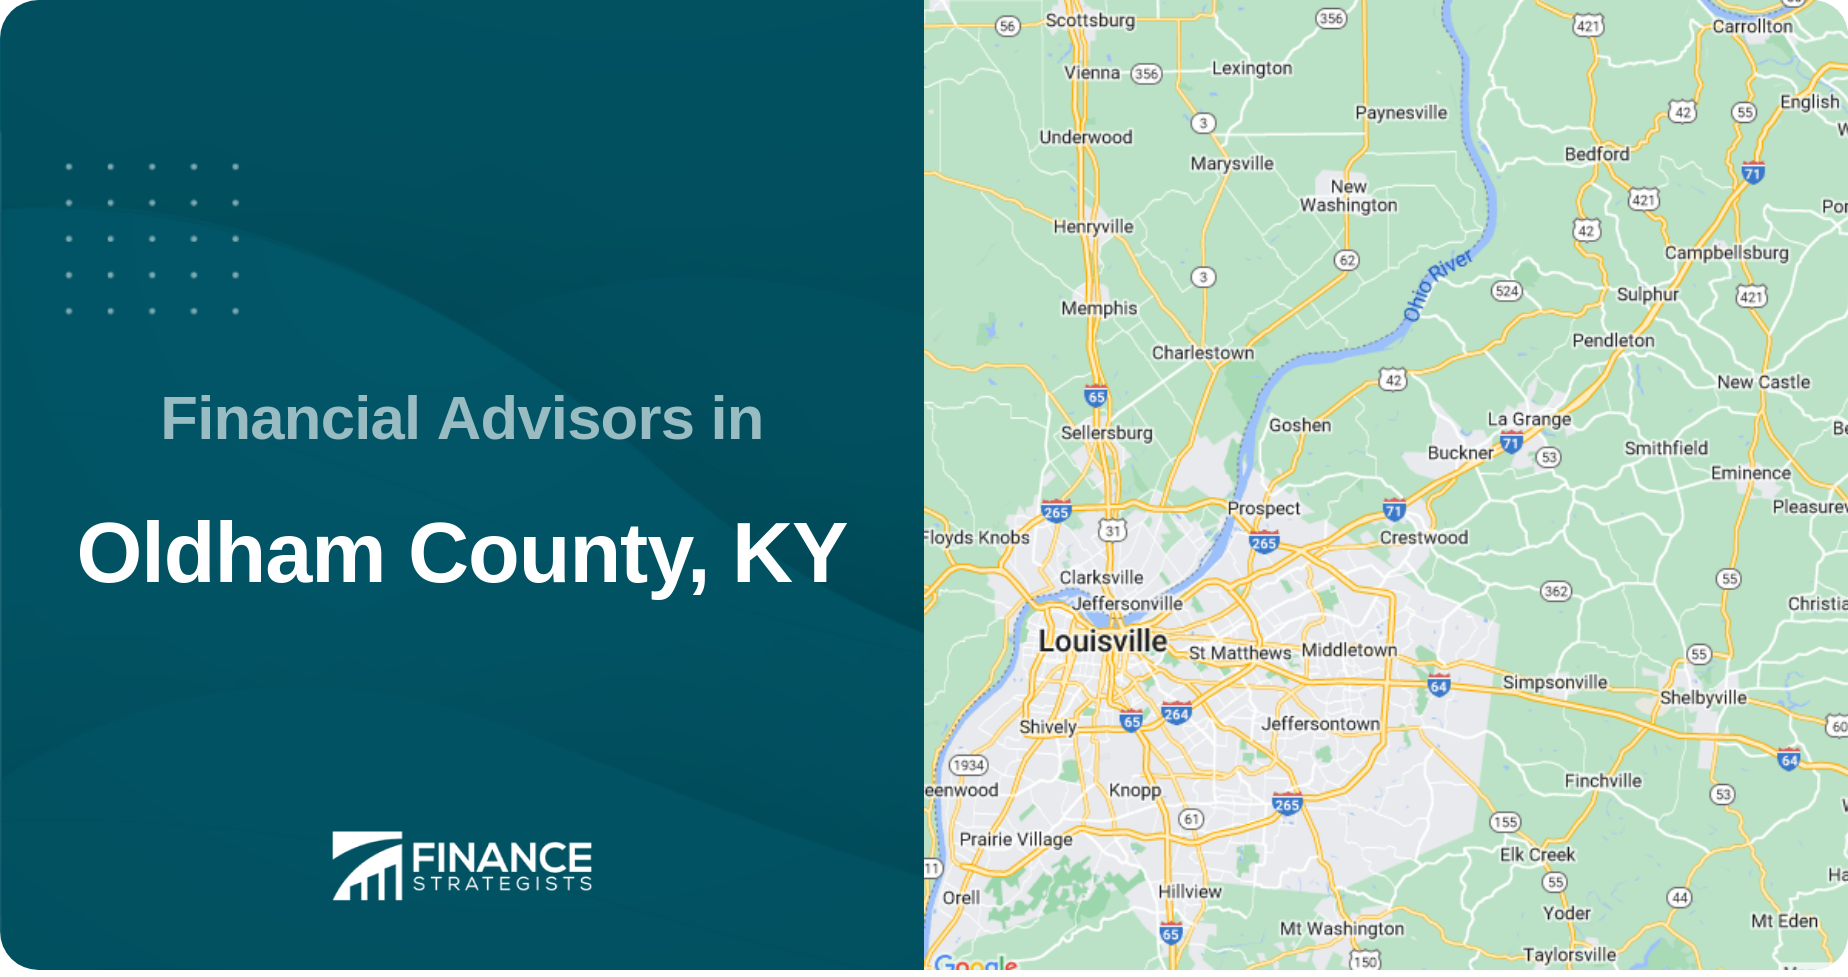 Financial Advisors in Oldham County, KY